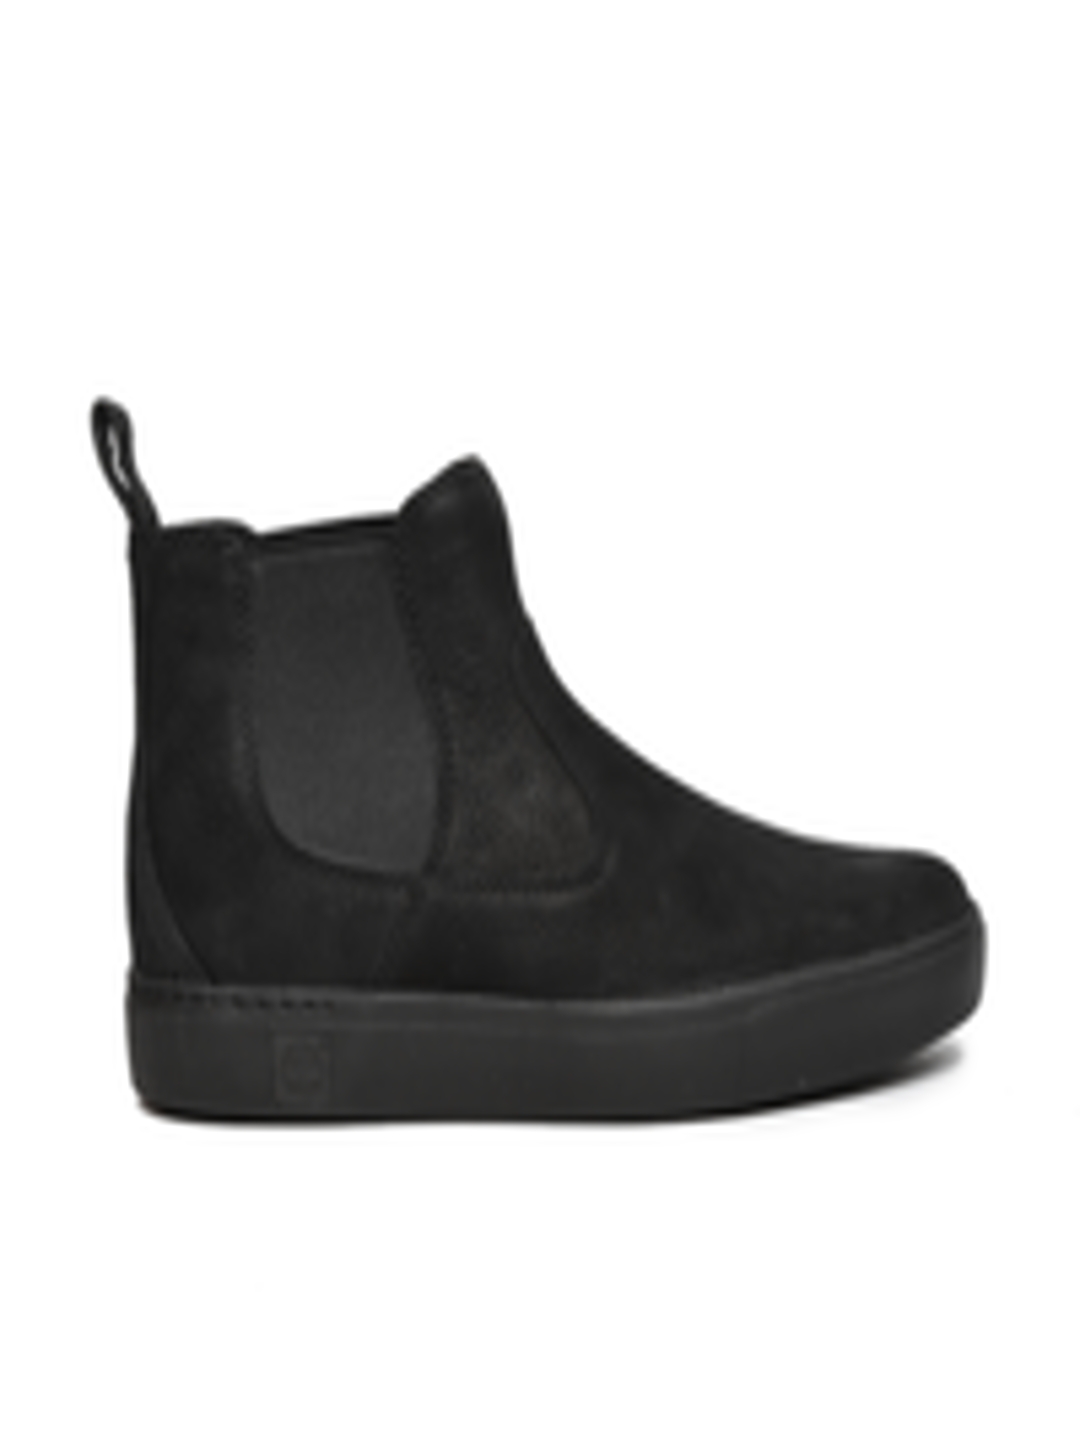 Buy Timberland Men Black AMHERST CHELSEA Leather Mid Top Flat Boots ...